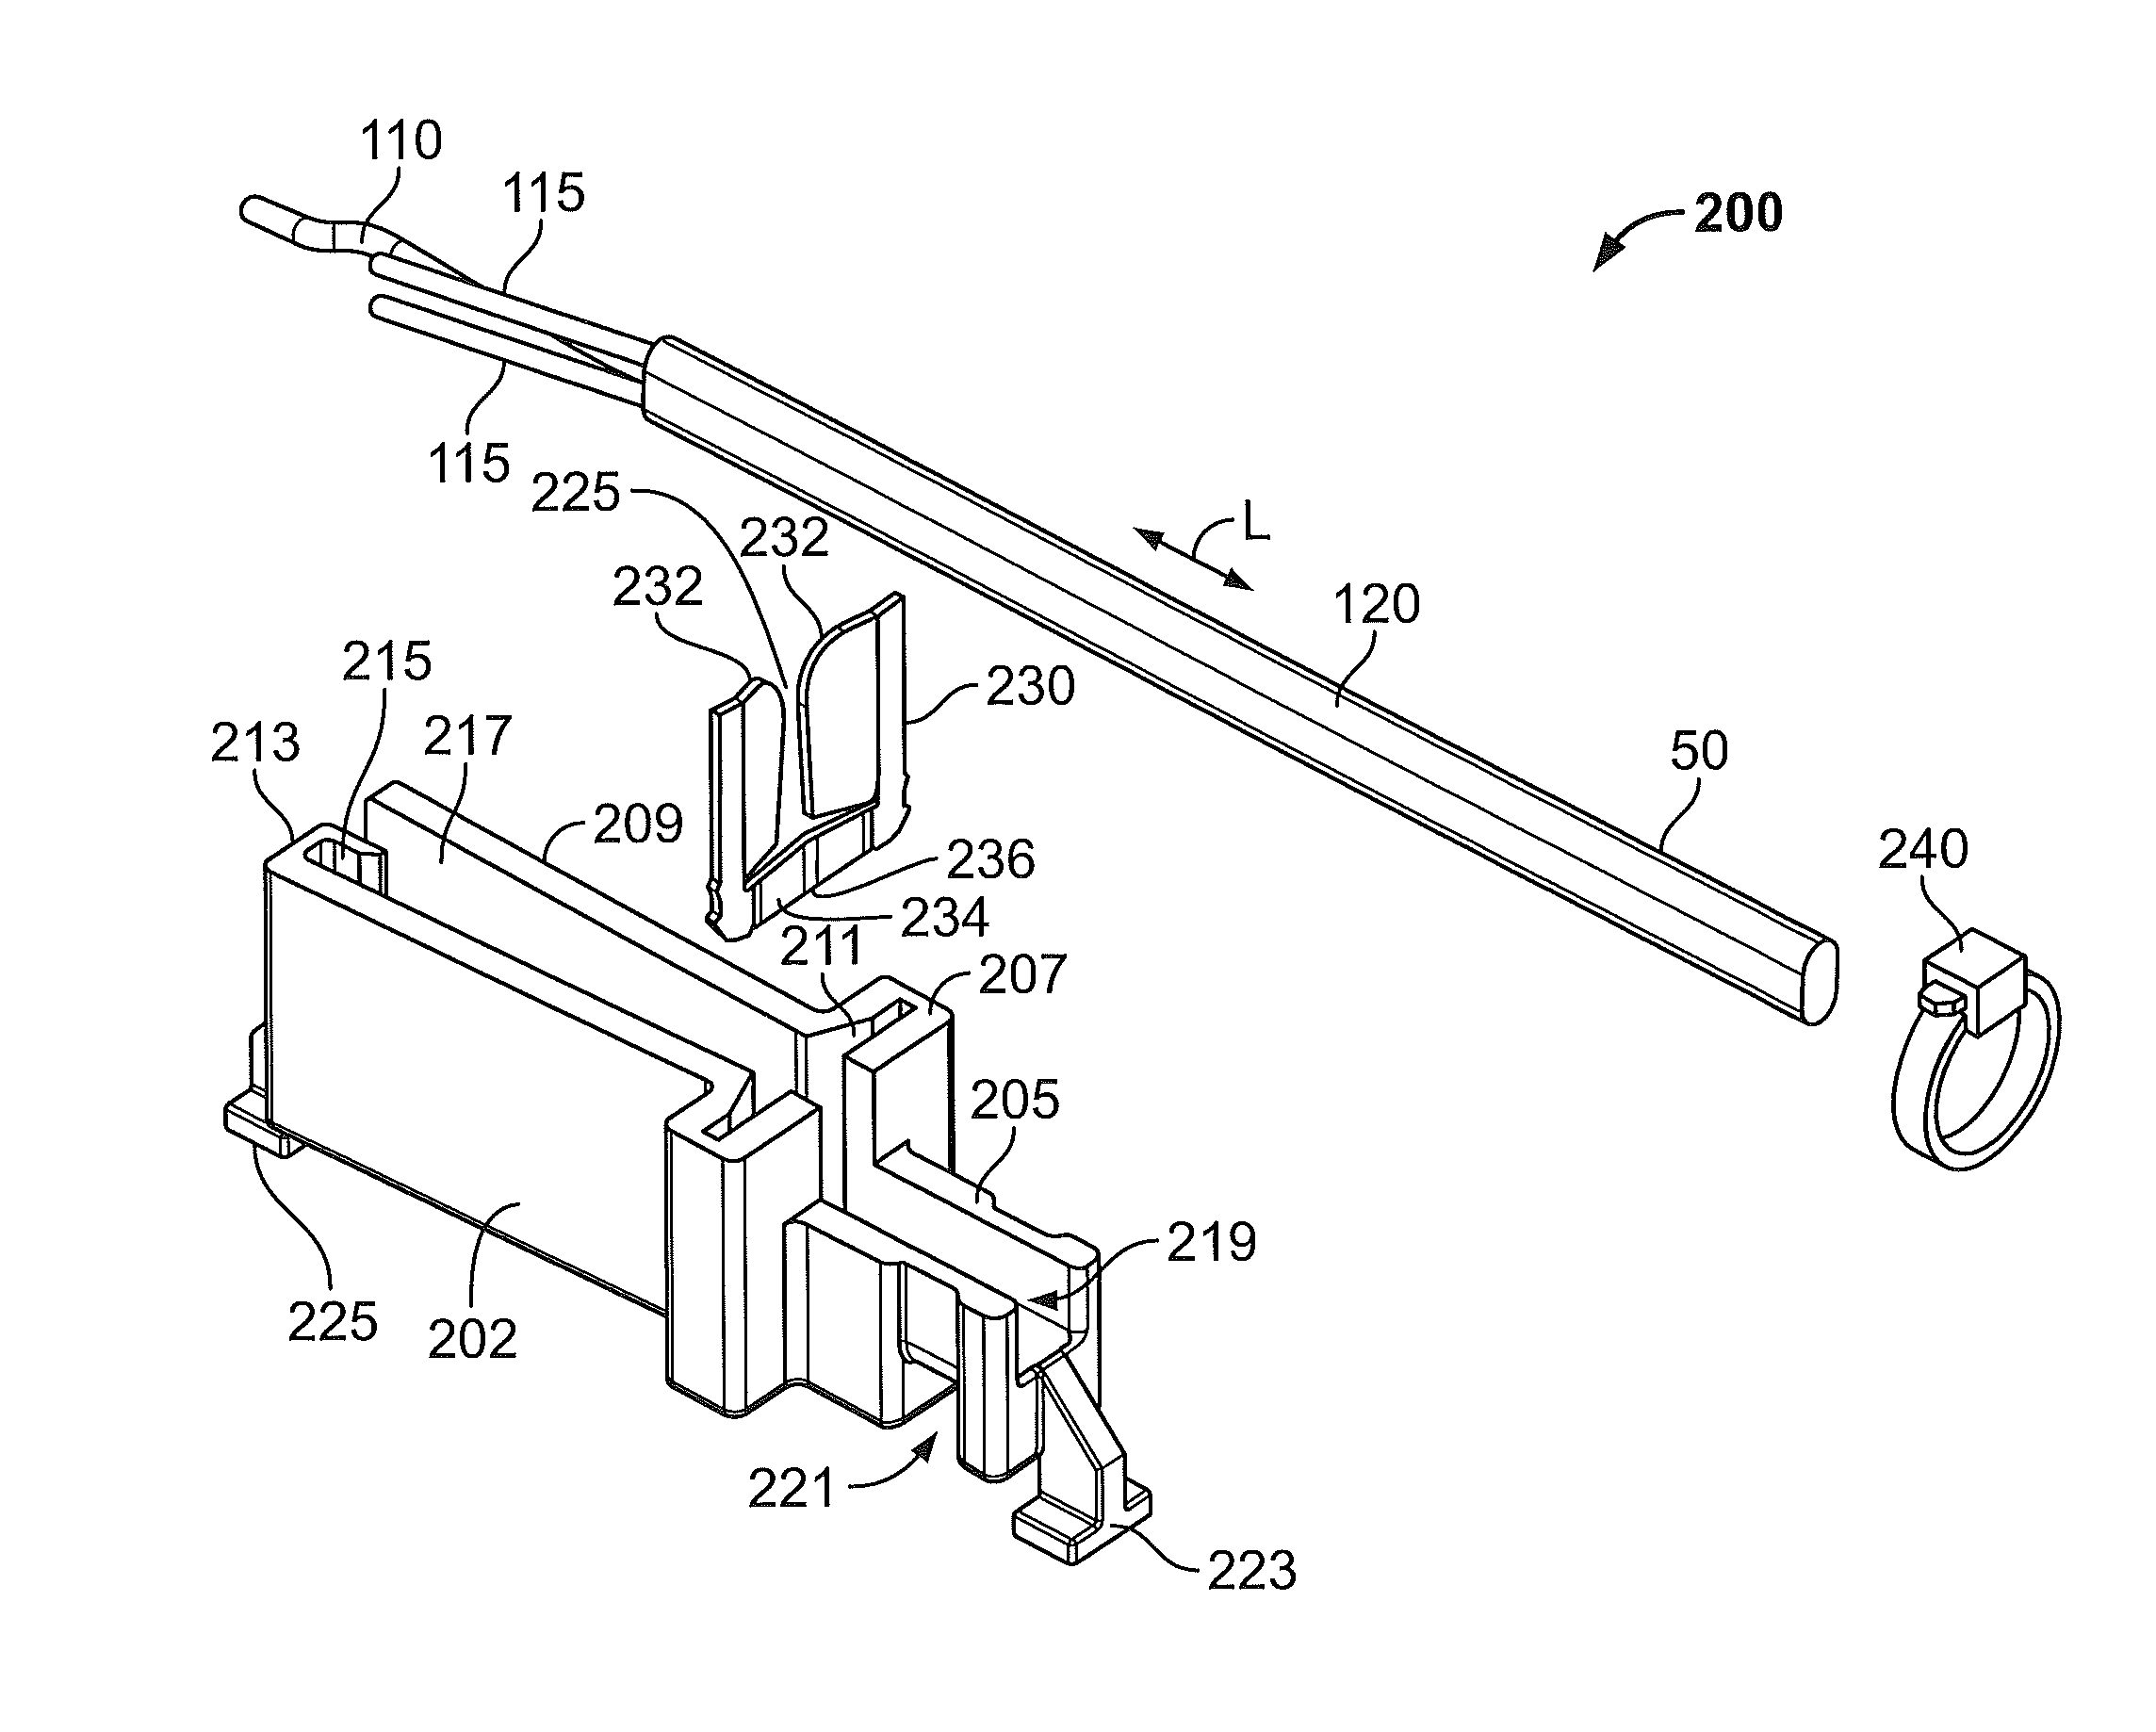 Cable strain relief clamping devices and methods for using the same